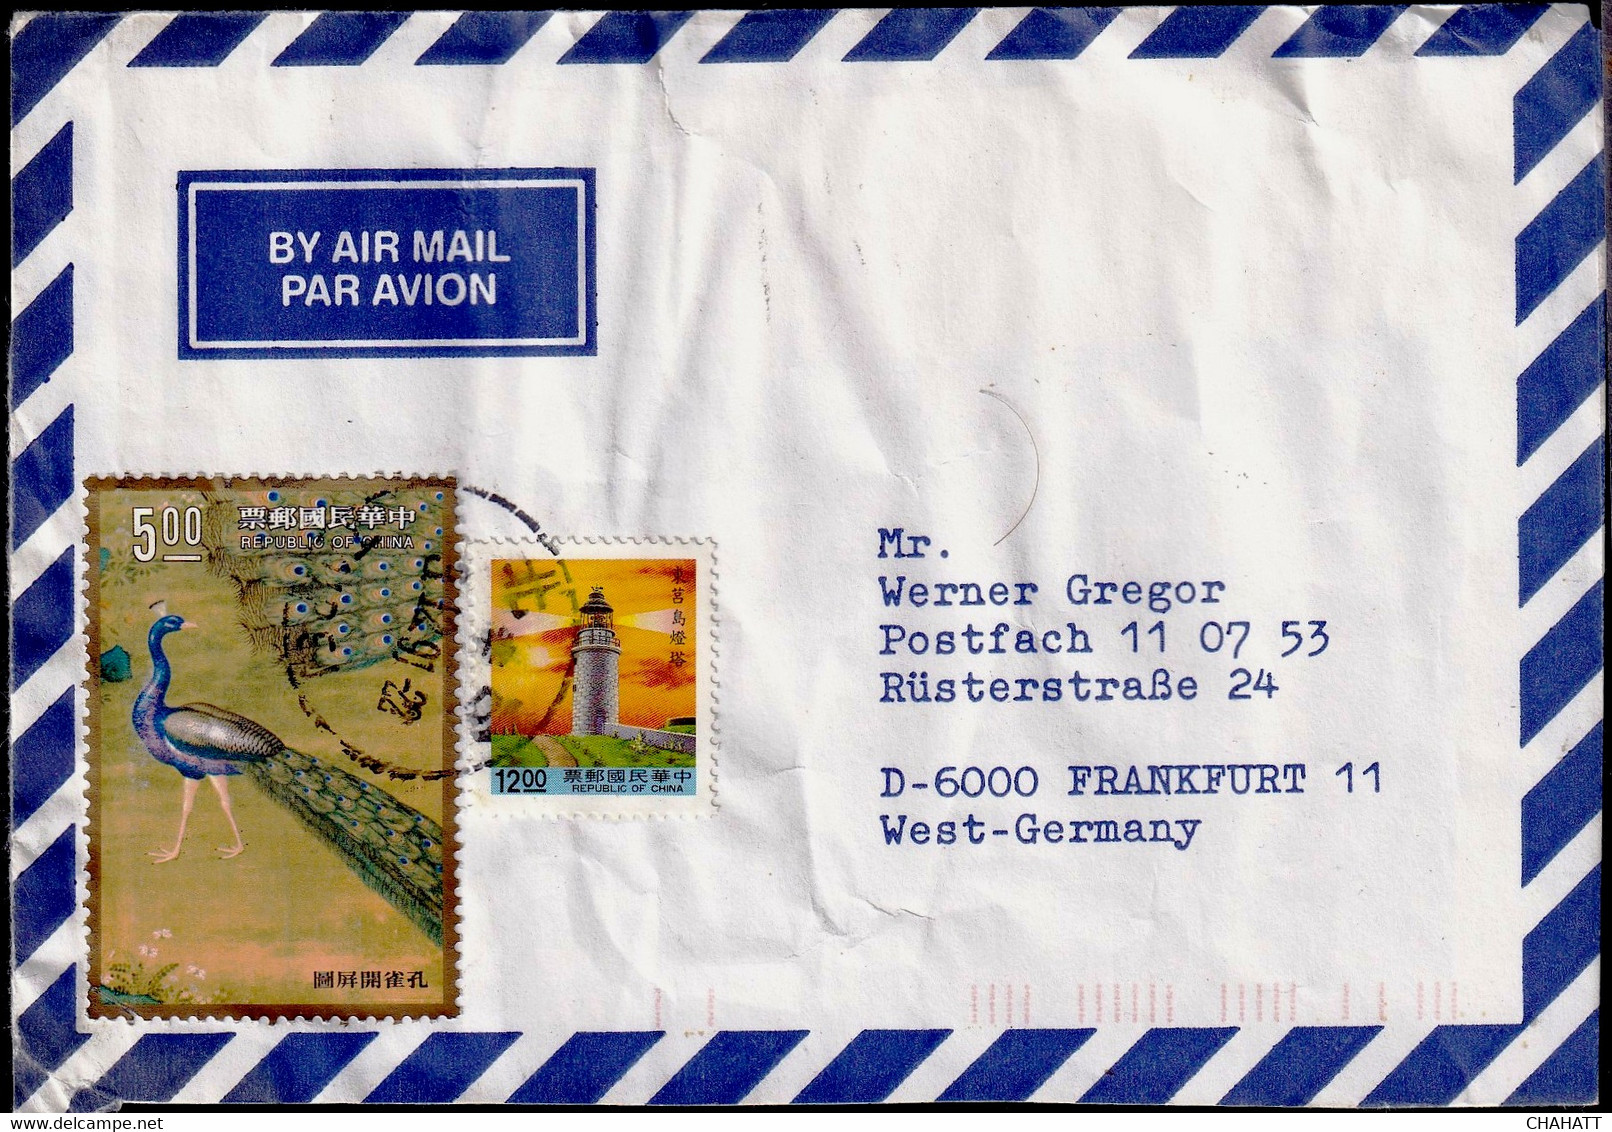 BIRDS - -INDIAN PEAFOWL- USED ON COVER WITH LIGHT HOUSE - POSTED TO GERMANY- COLOR VARIETY- BX4-17 - Pavos Reales